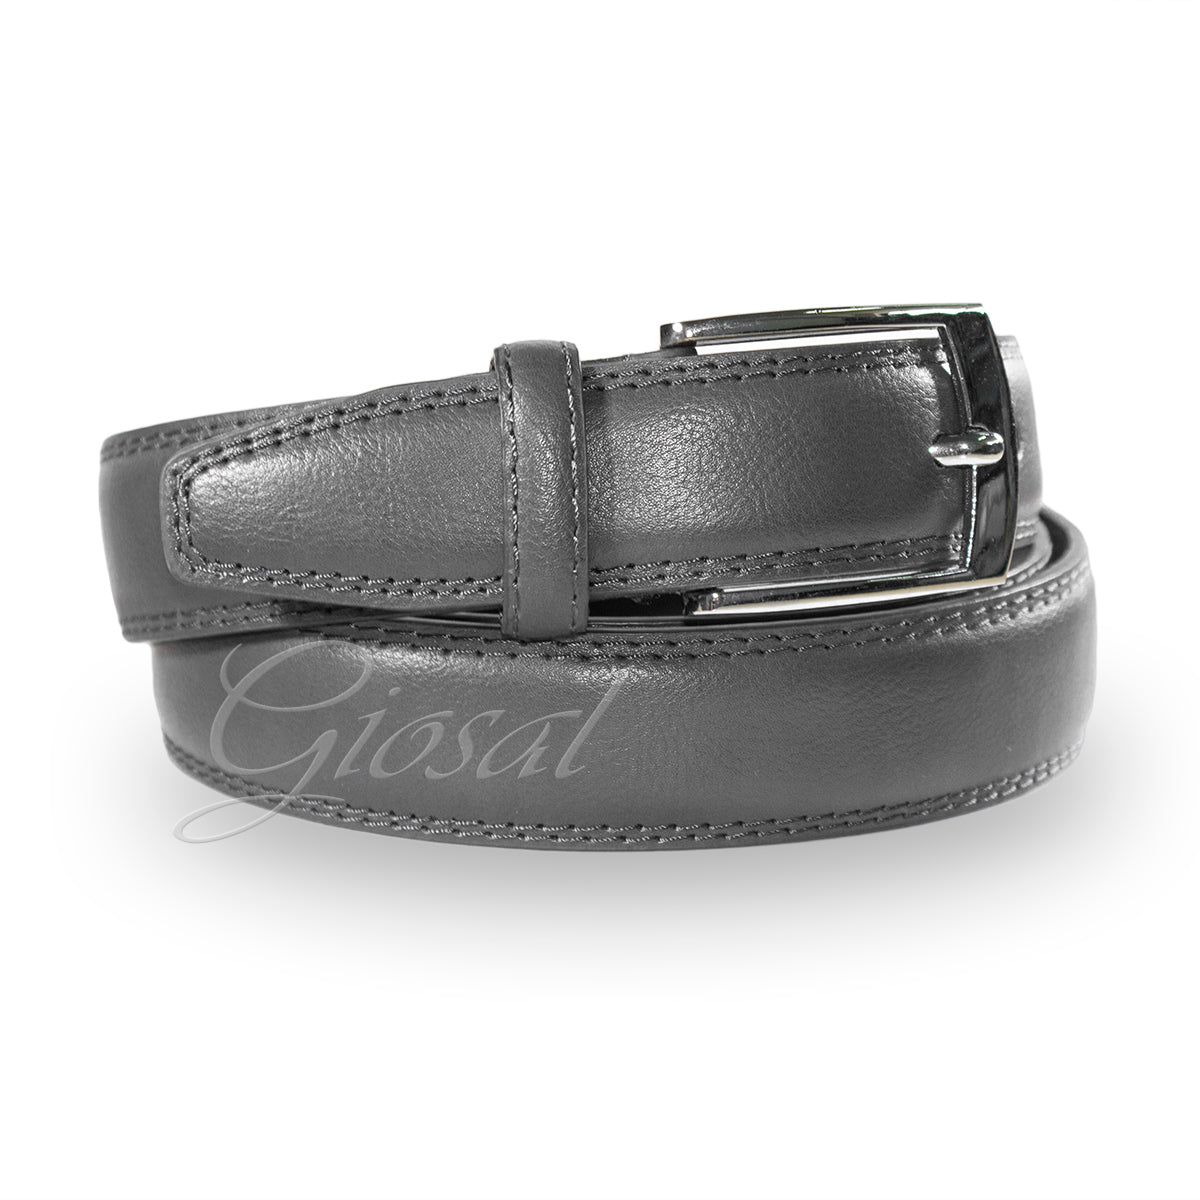 Men's Belt Belt with Adjustable Metal Buckle Gray Faux Leather Solid Color Basic GIOSAL-A2043A